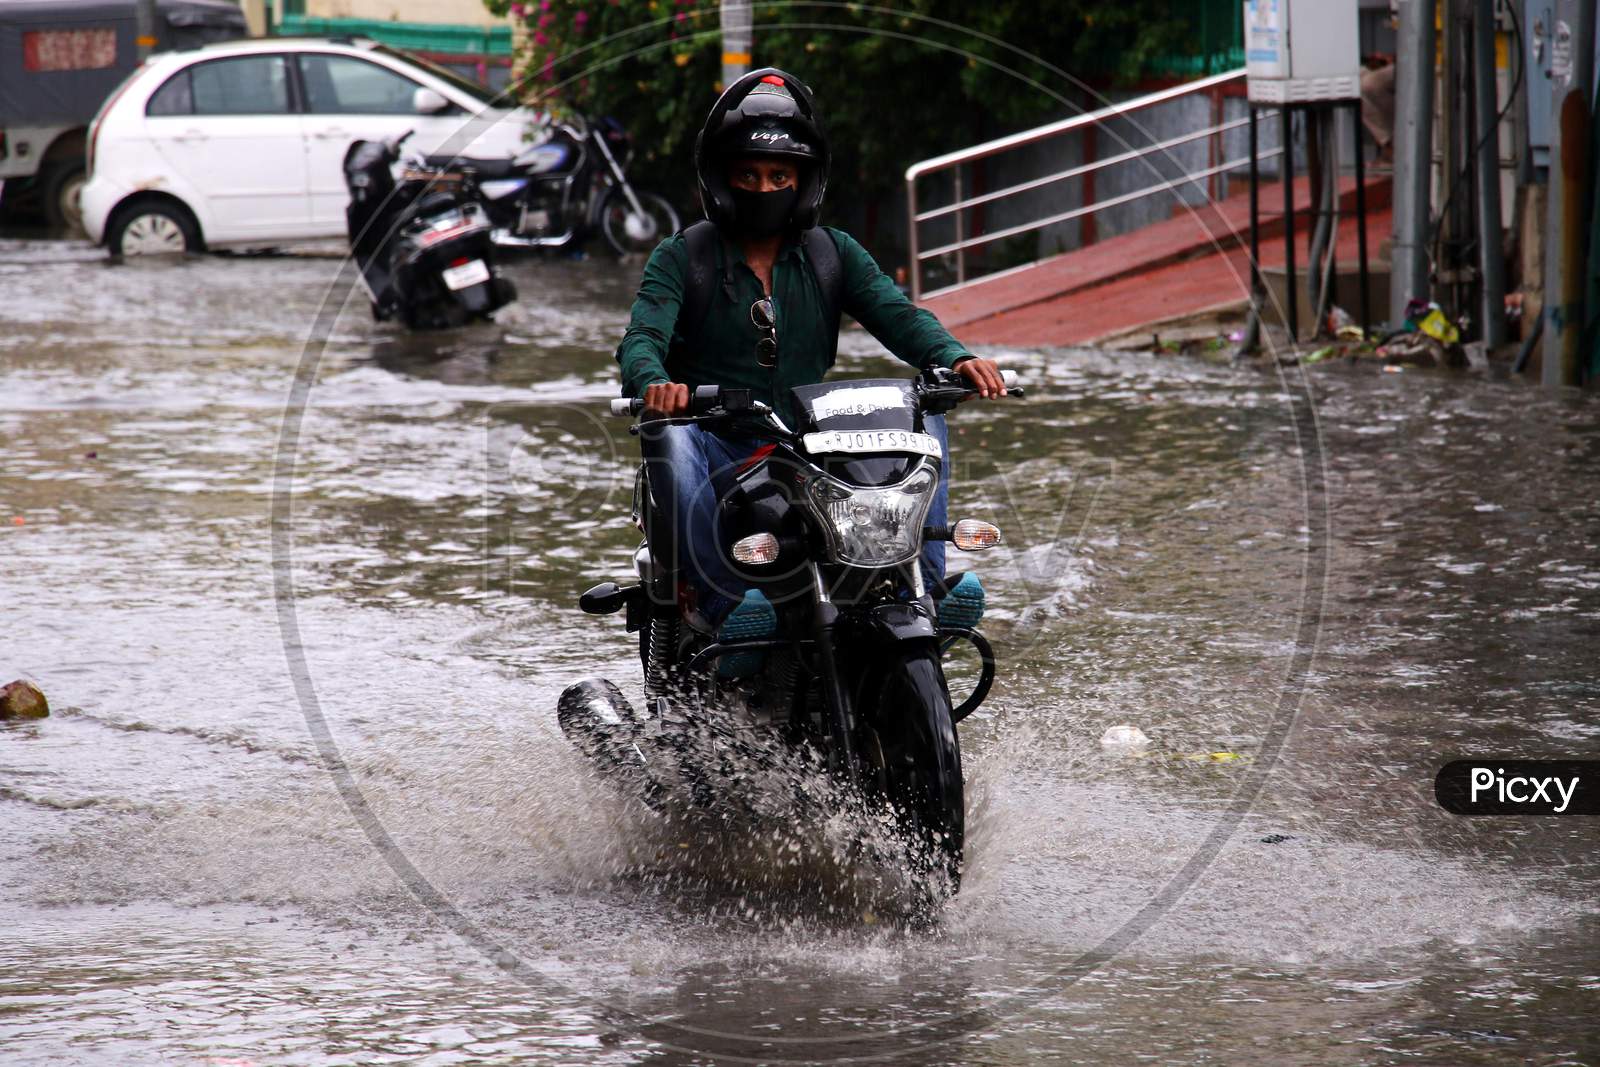 A Bike Rider  On A Waterlogged Road During Rain, In Ajmer, Rajasthan, India On 04 June 2020.